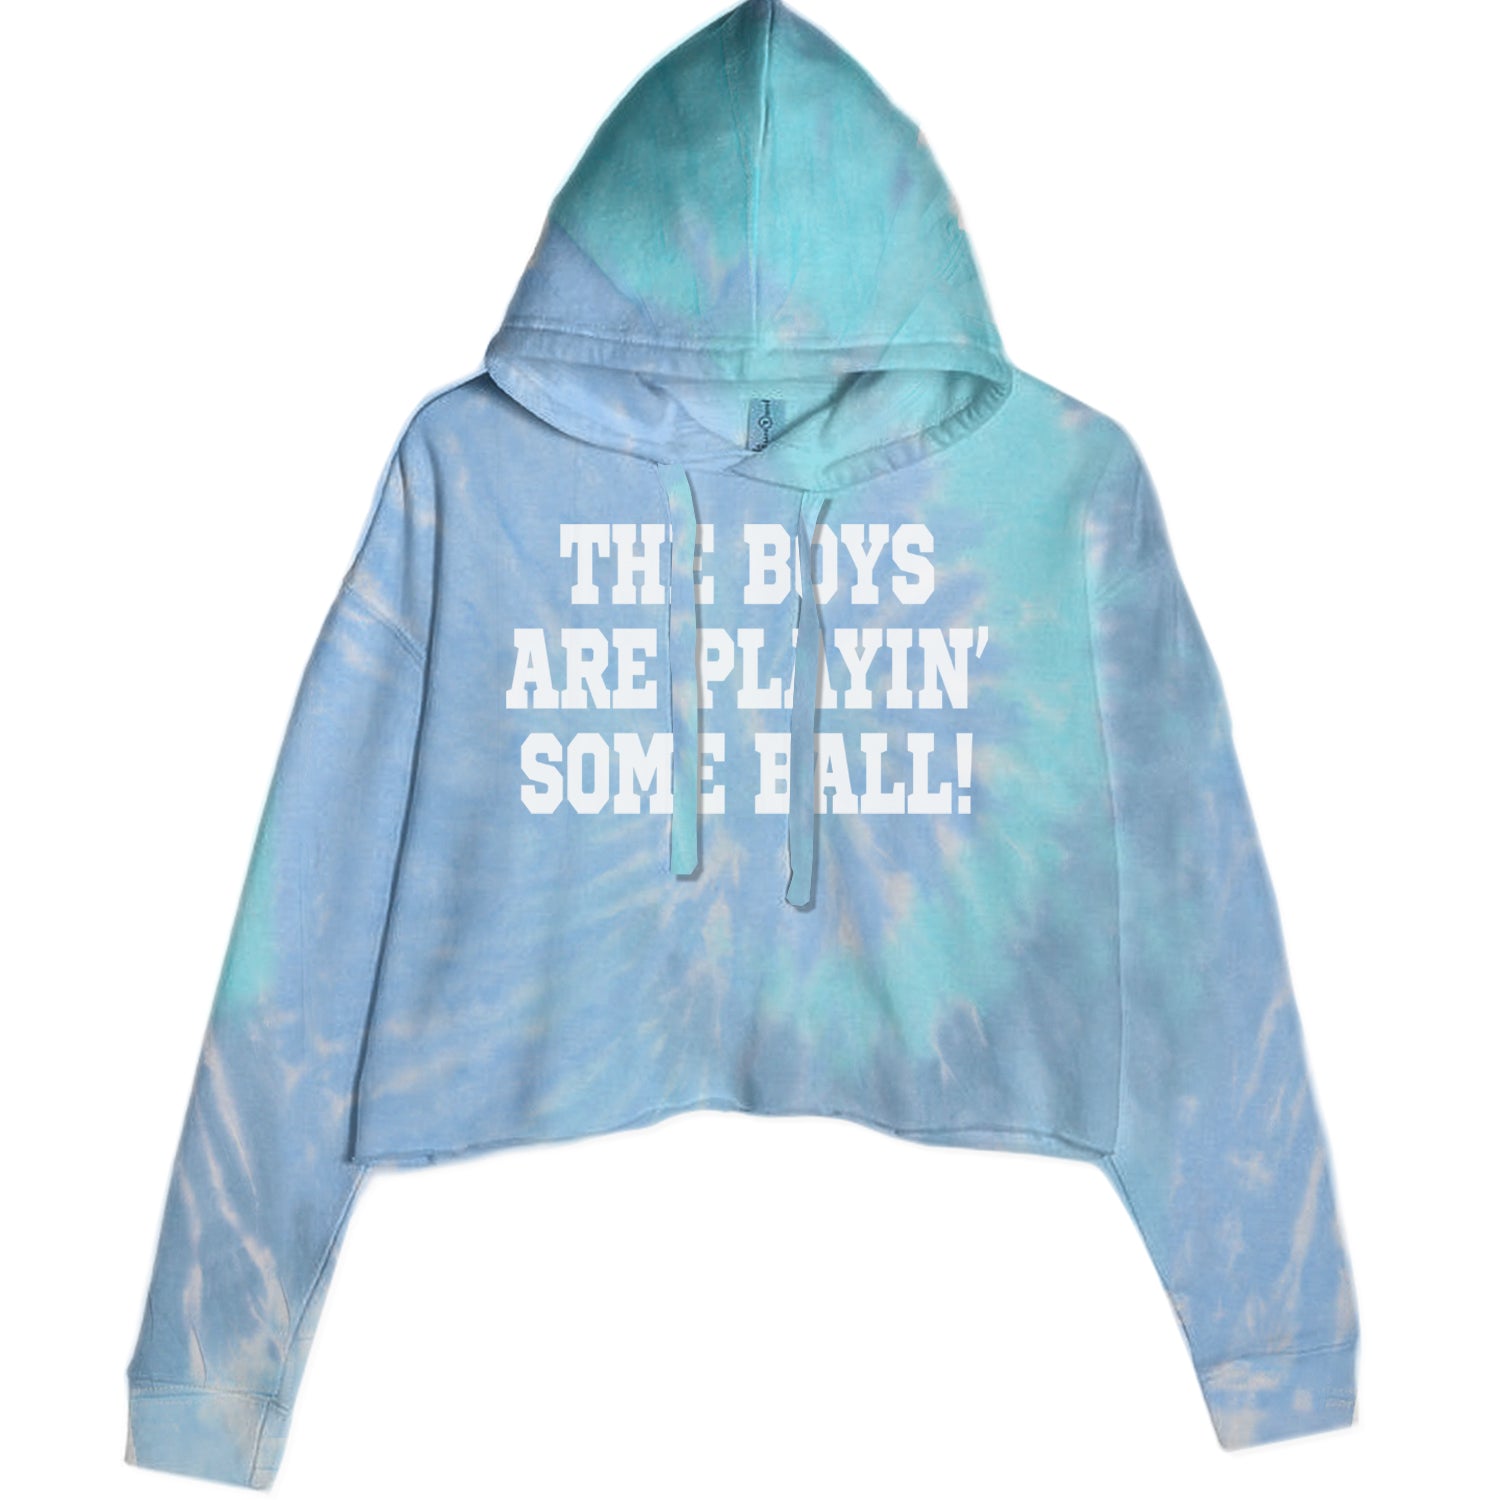 The Boys Are Playing Some Baseball Cropped Hoodie Sweatshirt